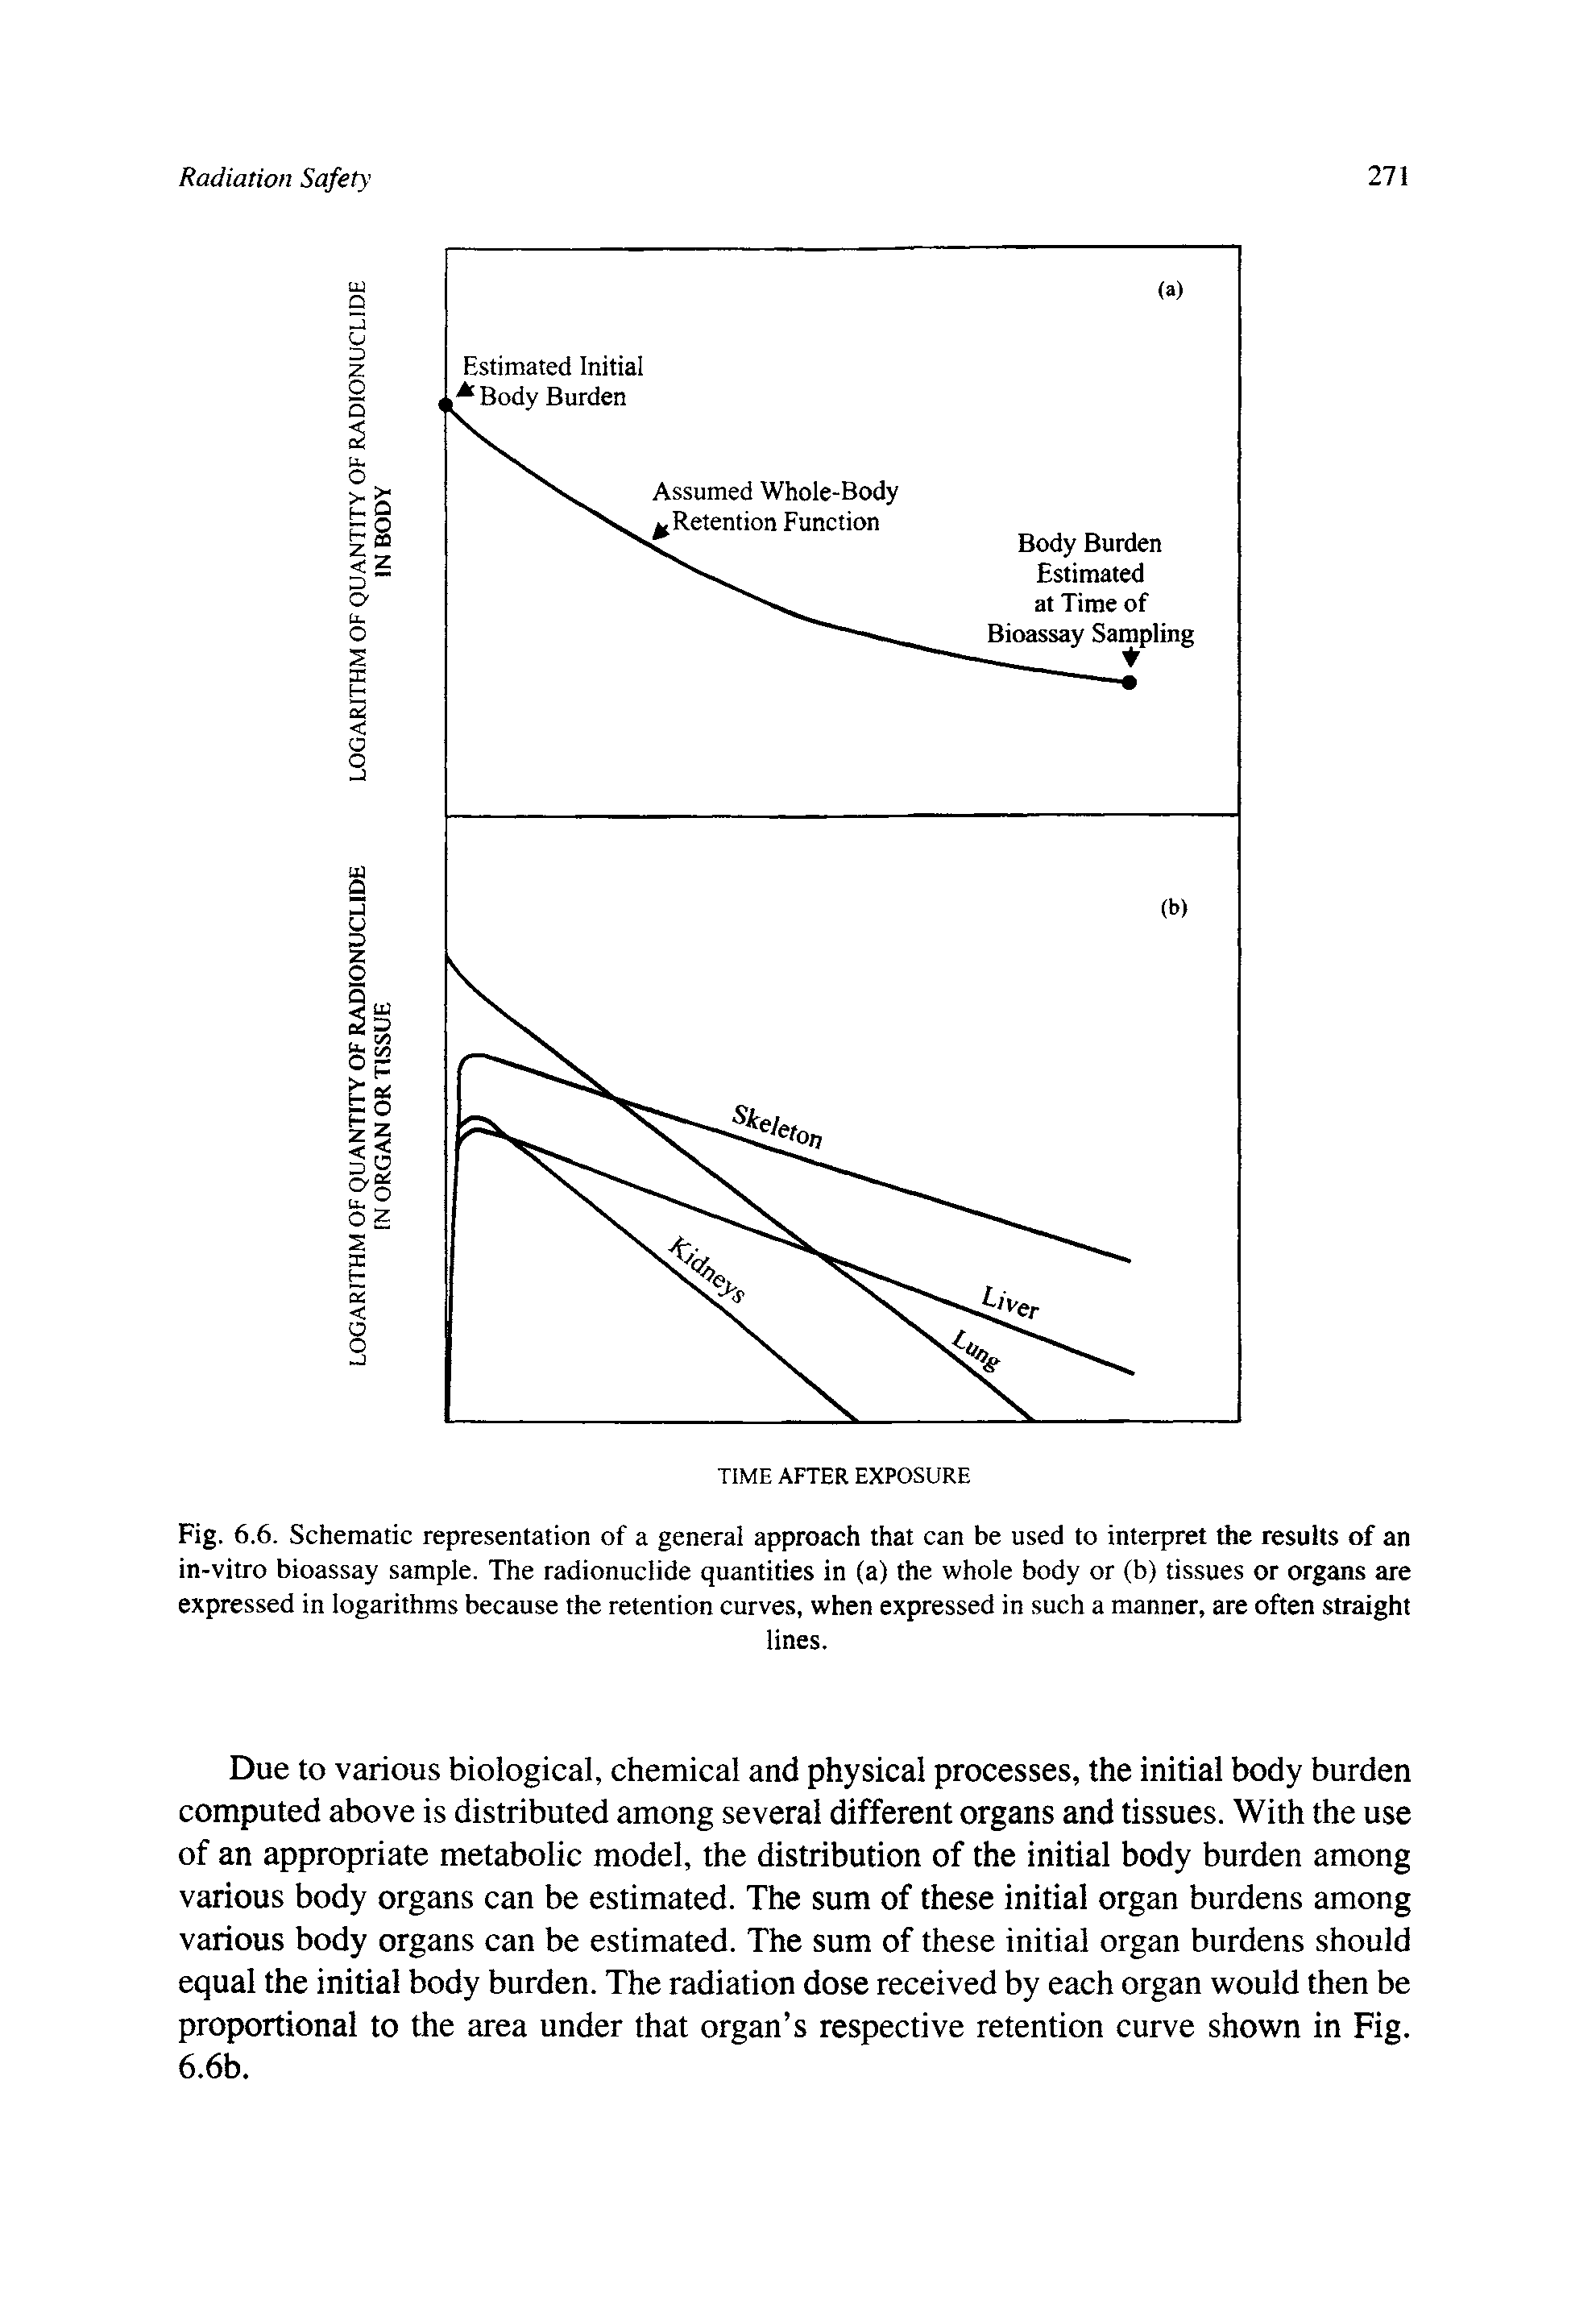 Fig. 6.6. Schematic representation of a general approach that can be used to interpret the results of an in-vitro bioassay sample. The radionuclide quantities in (a) the whole body or (b) tissues or organs are expressed in logarithms because the retention curves, when expressed in such a manner, are often straight...